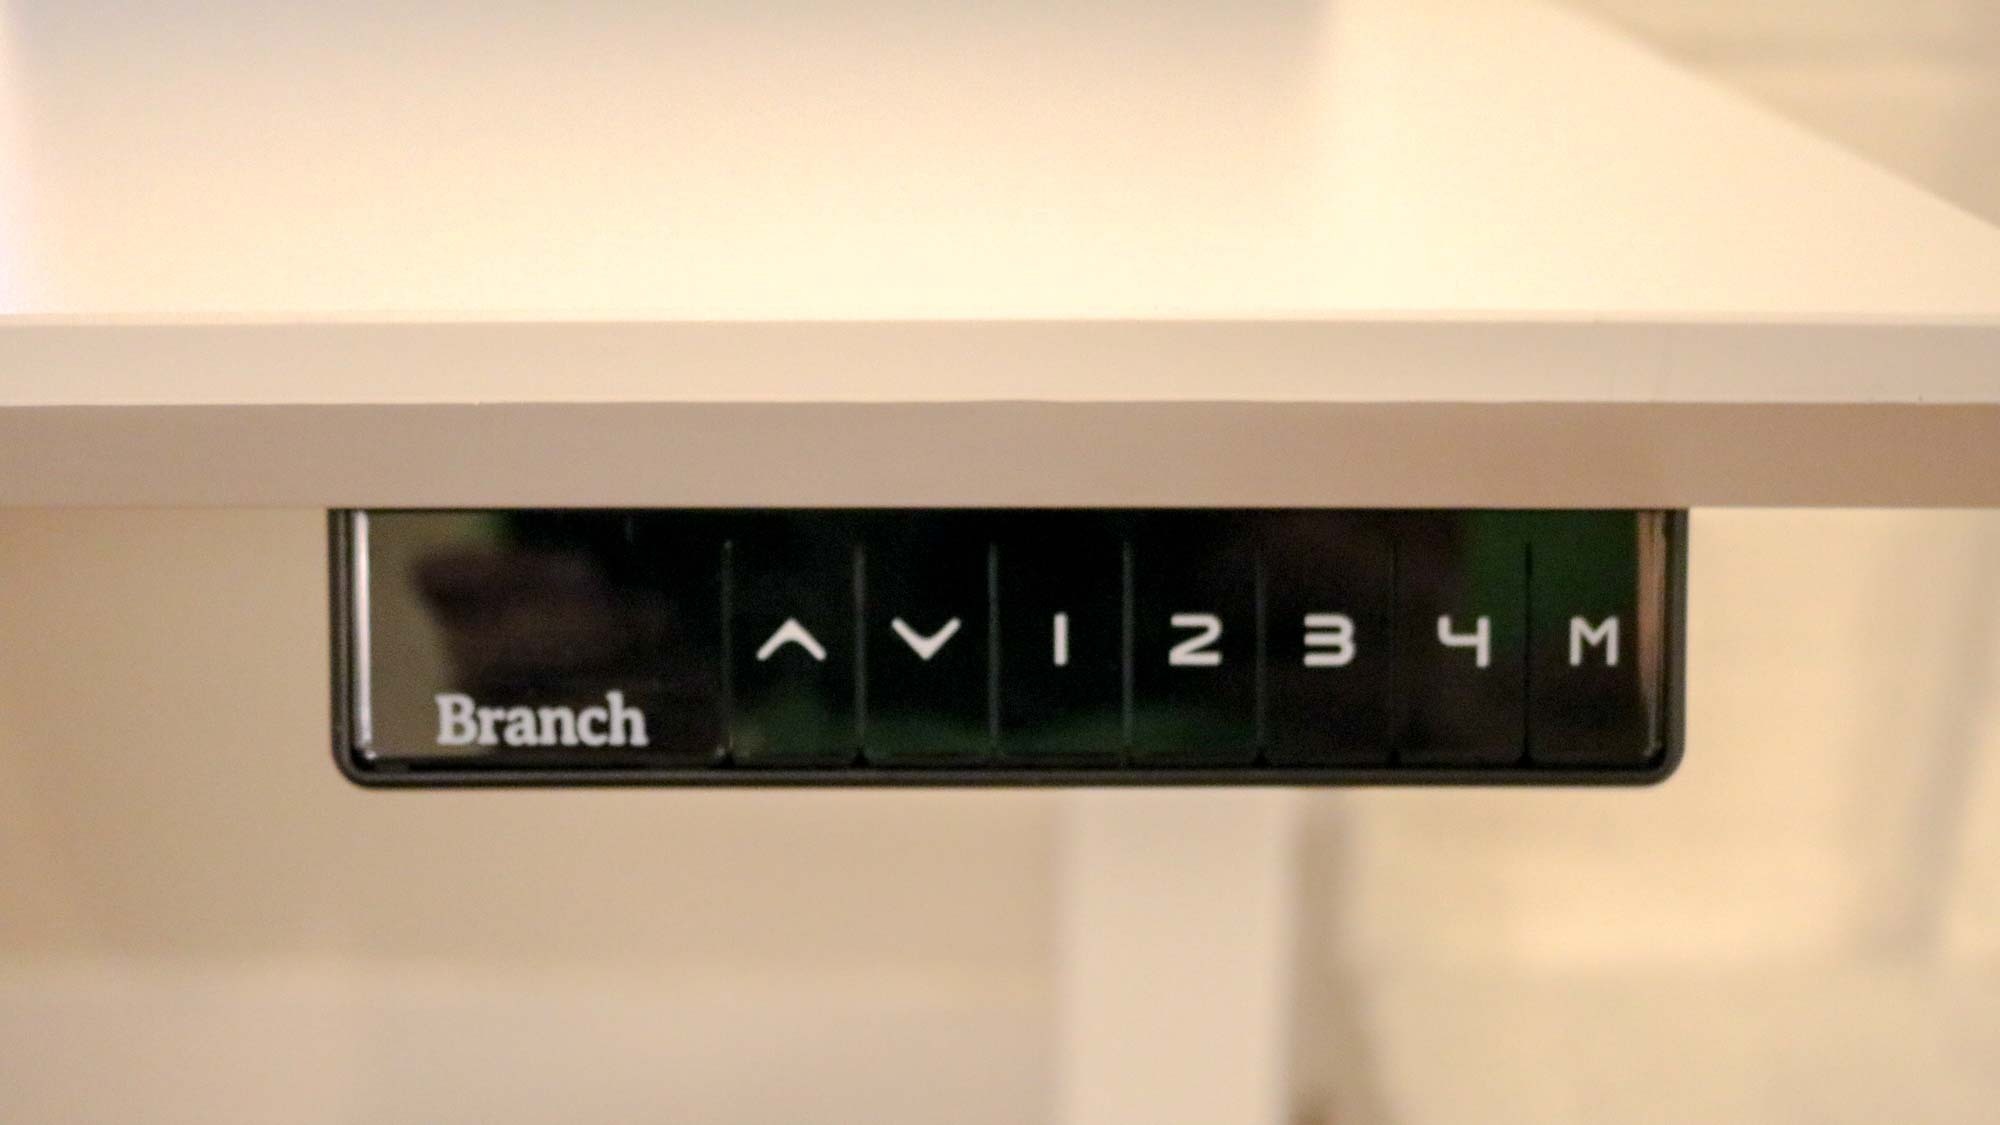 The keyboard on the branch's permanent desk